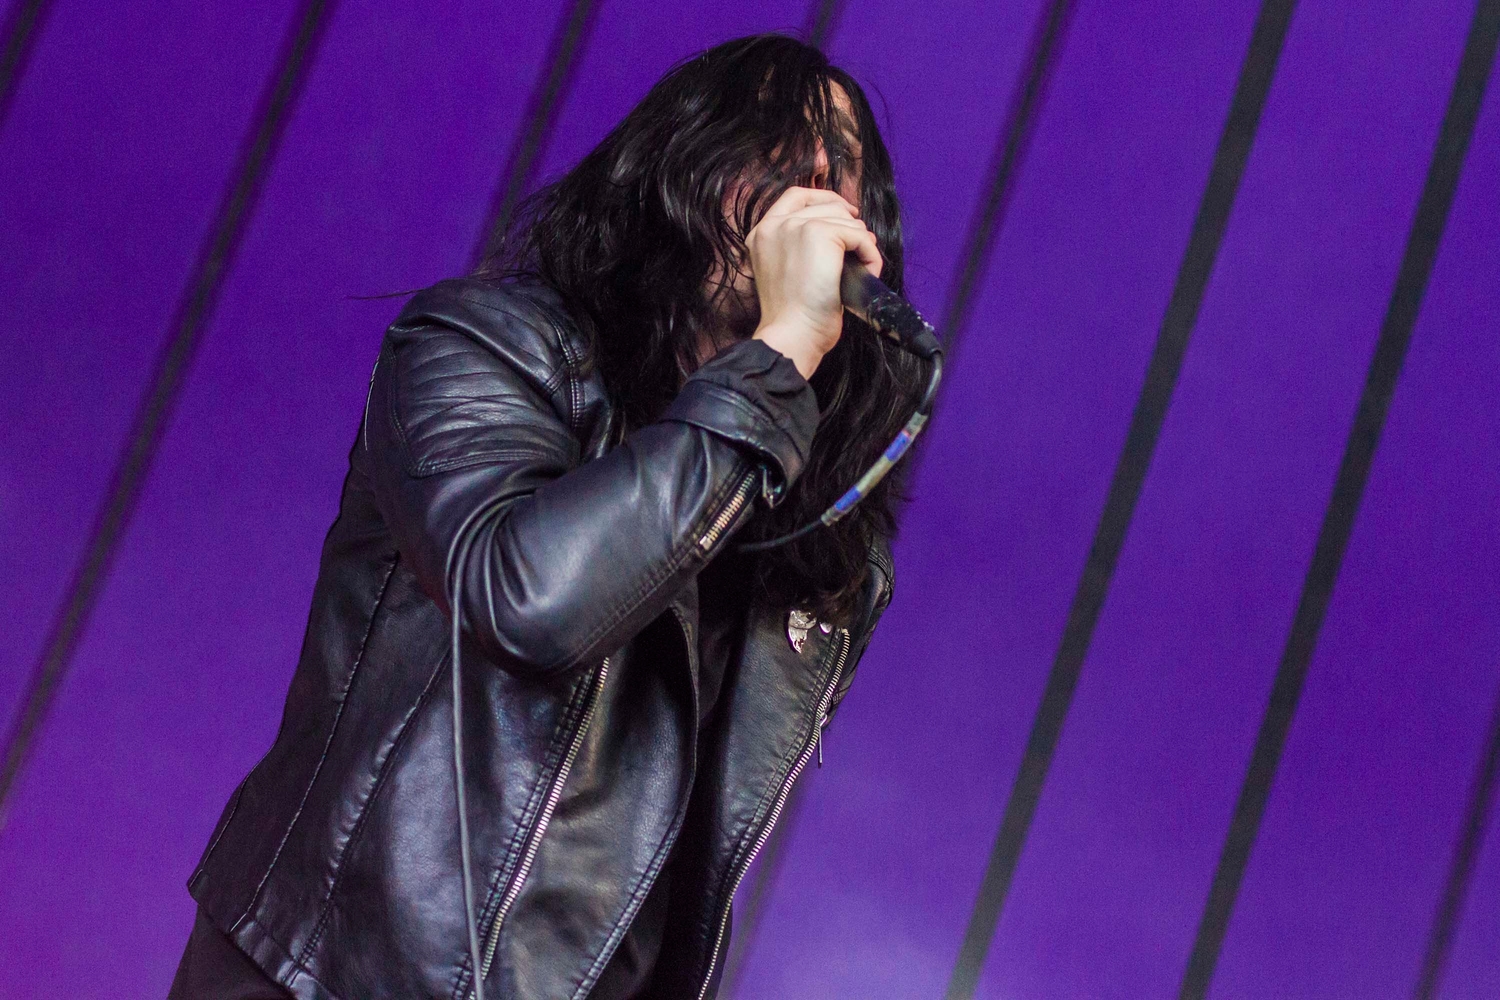 Creeper lay waste to Reading 2016